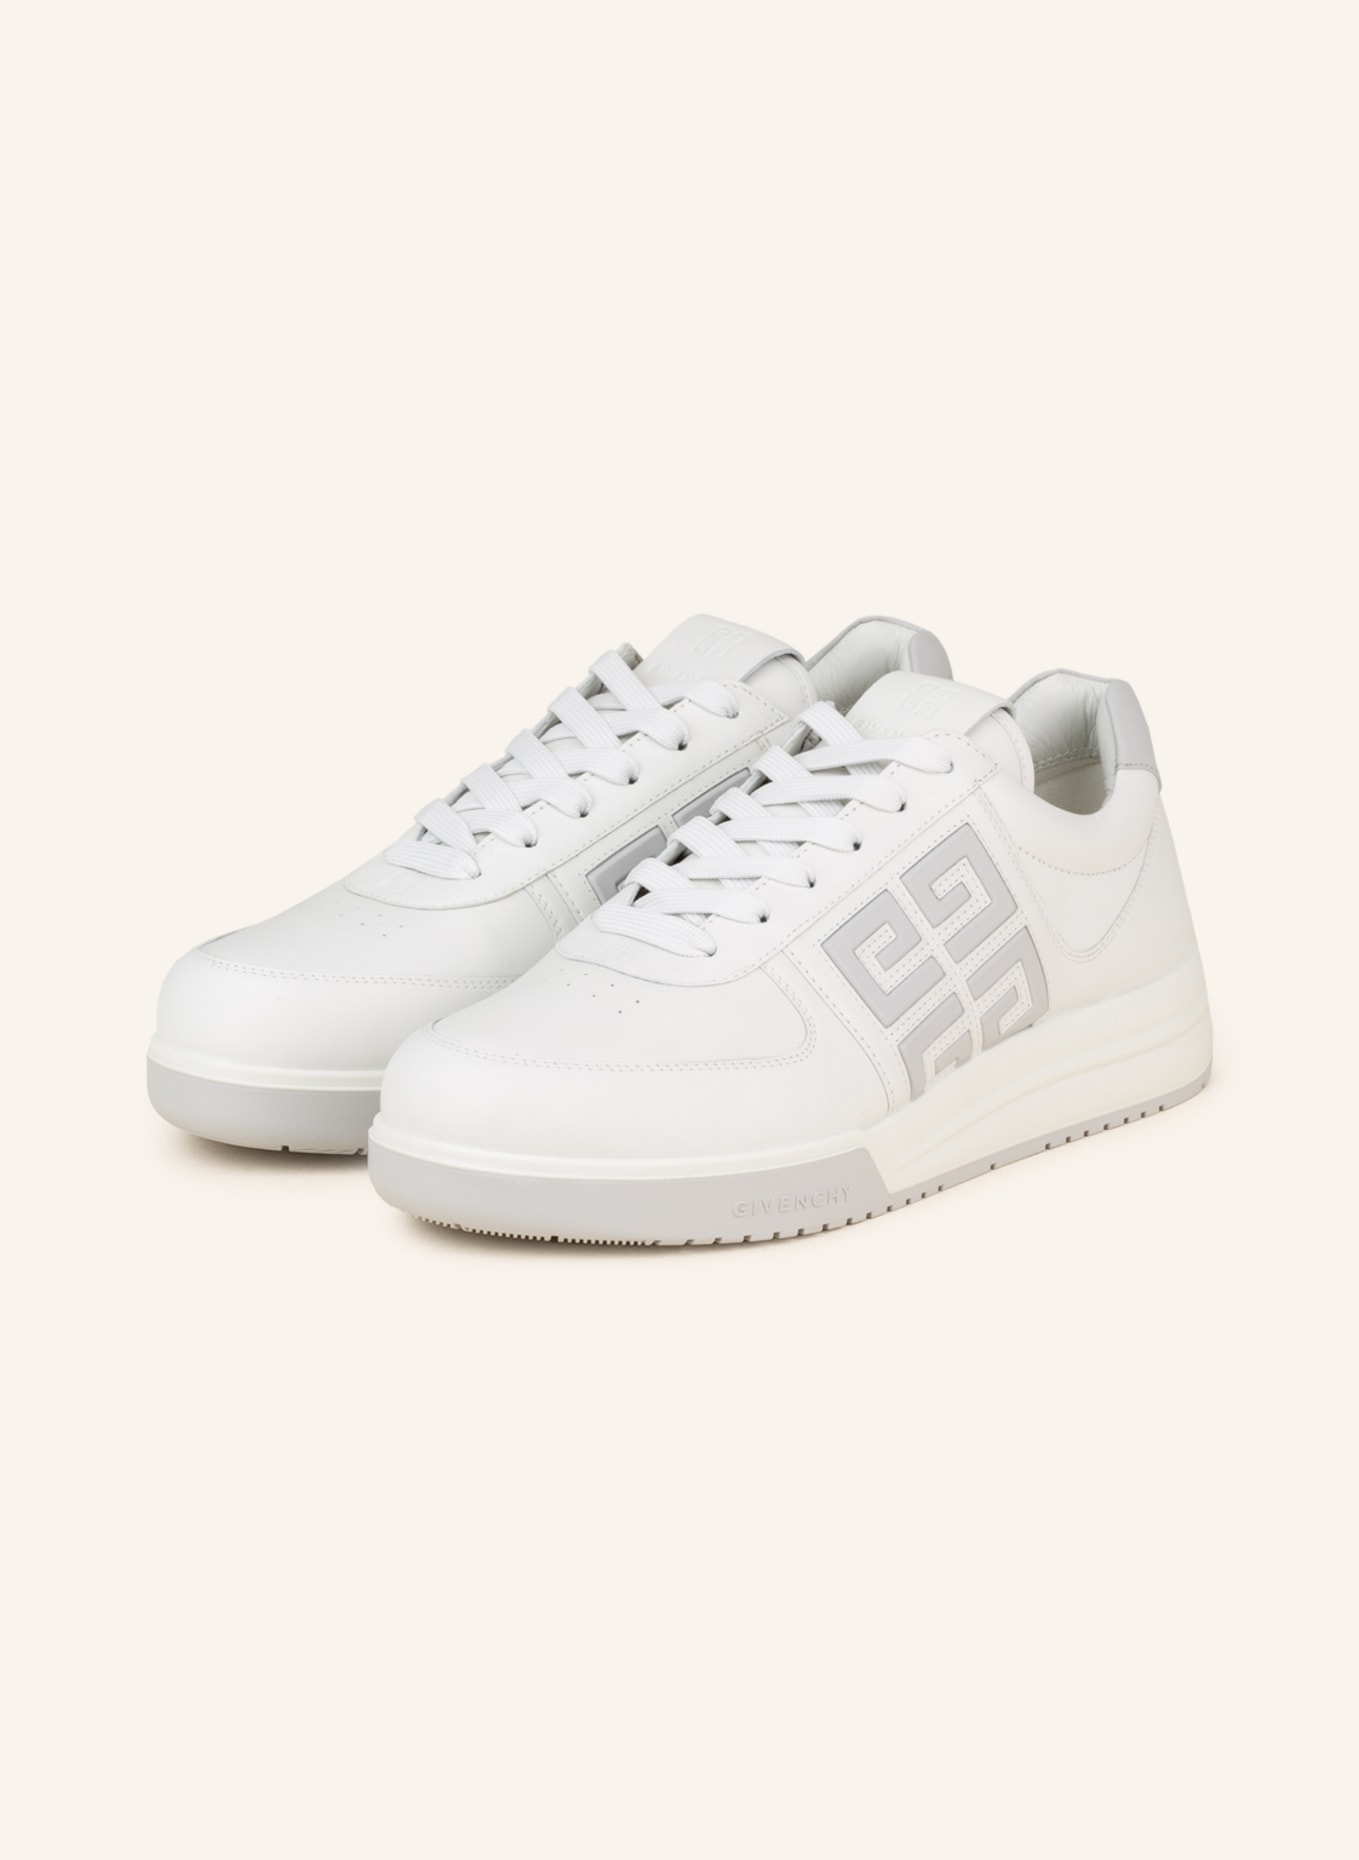 GIVENCHY Sneaker G4, Farbe: WEISS (Bild 1)